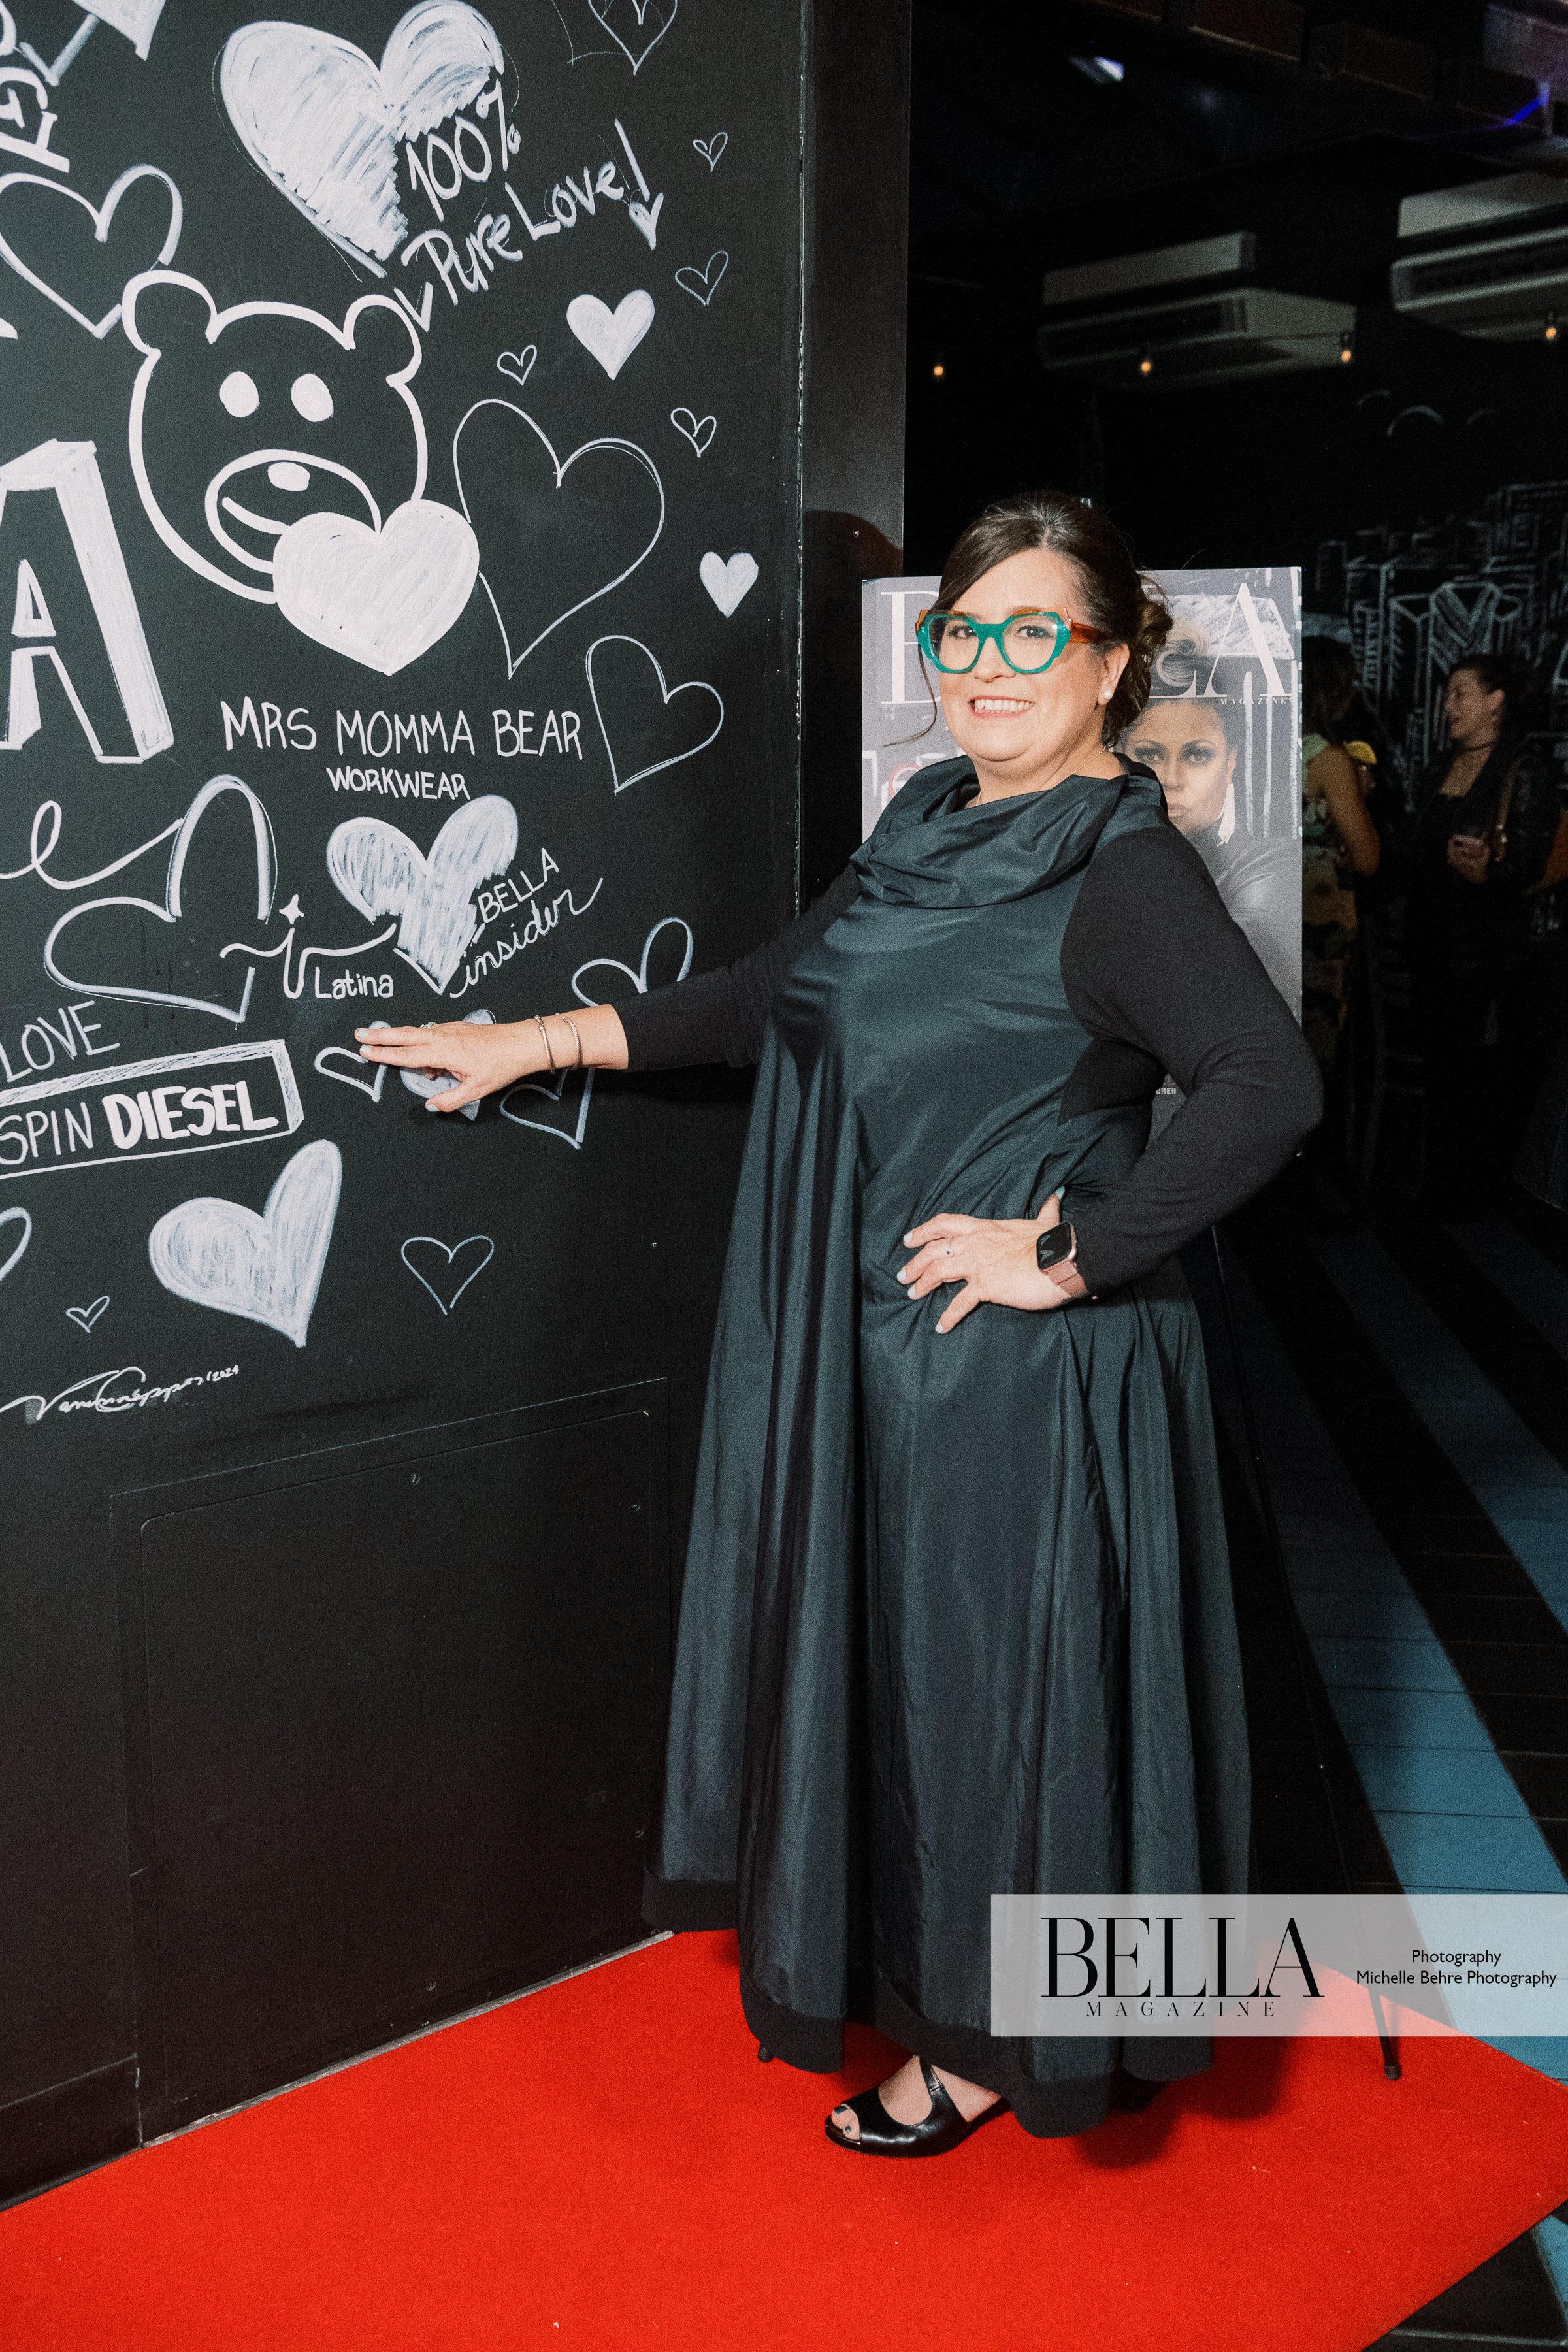 Michelle-Behre-Creative-Co-BELLA-Magazine-Women-of-Influence-Cover-Party-Burgerology-83.jpg